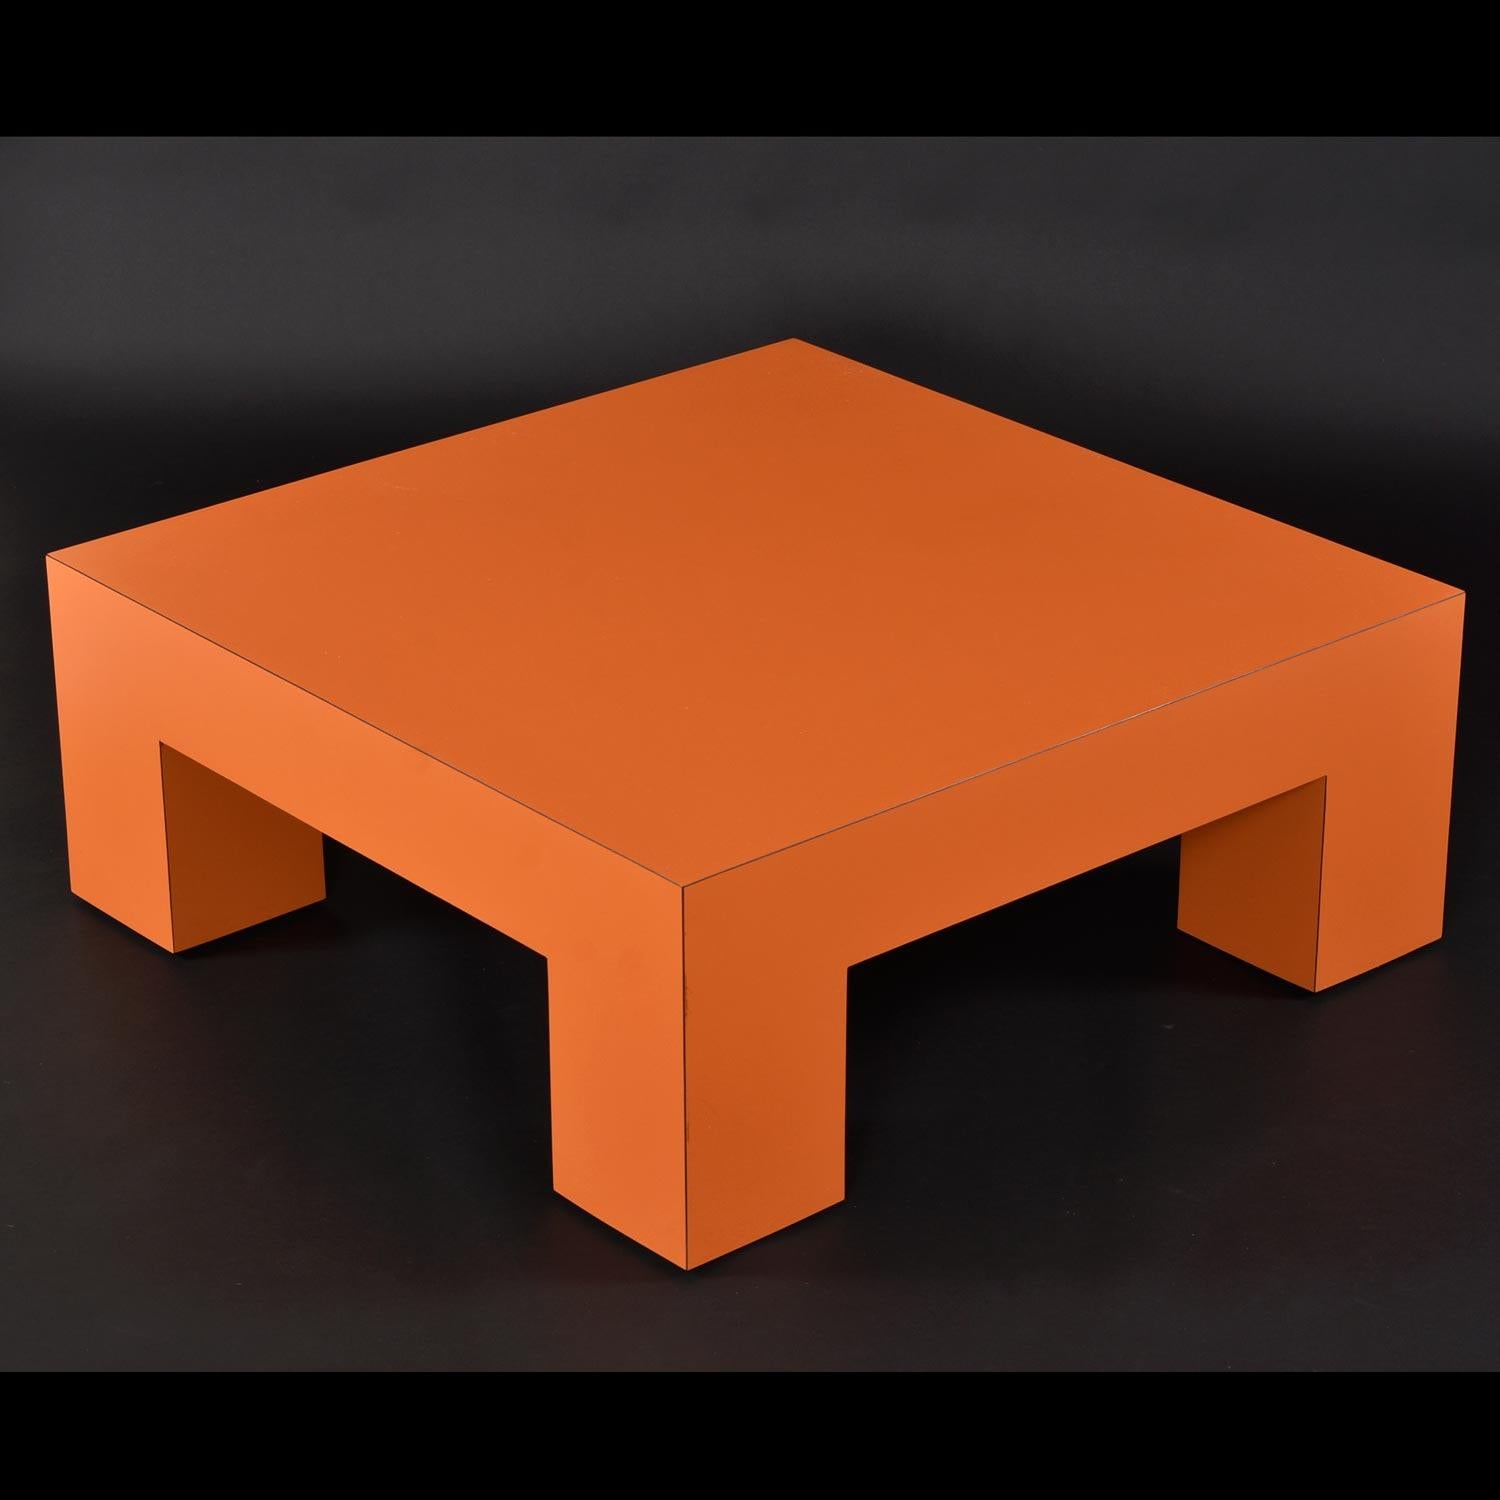 Big, bold, bright, at 42? square this parking-cone orange coffee table refuses to be meek. This table is simultaneously minimalist and maximalist. The designer consciously exaggerated the scale to add presence to an otherwise simple silhouette.